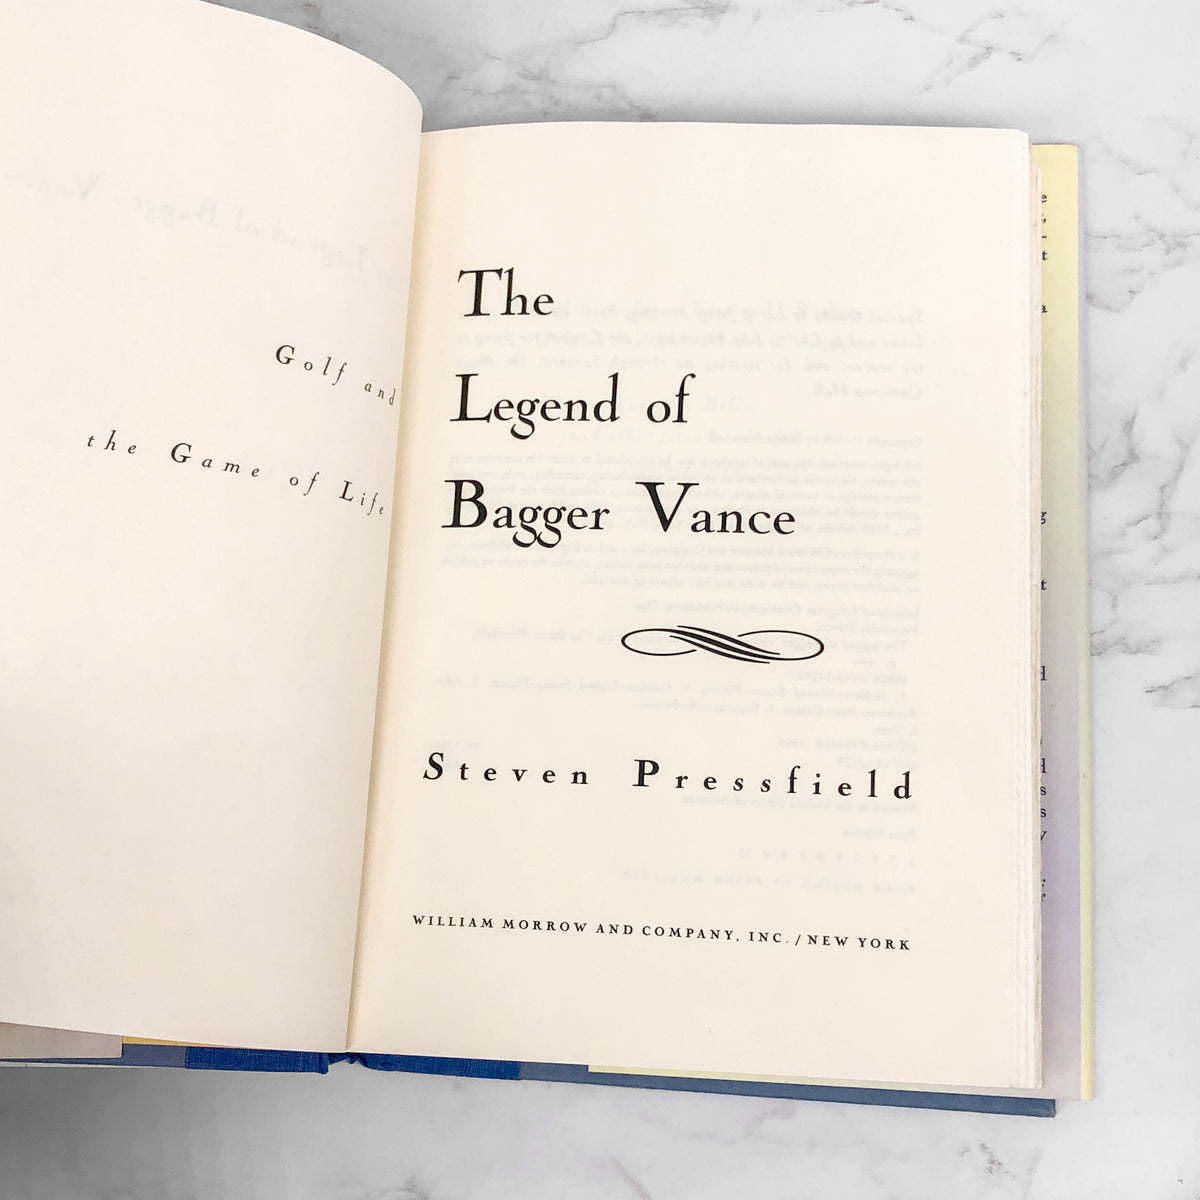 The Legend of Bagger Vance: A Novel of Golf and the Game of Life by Steven  Pressfield